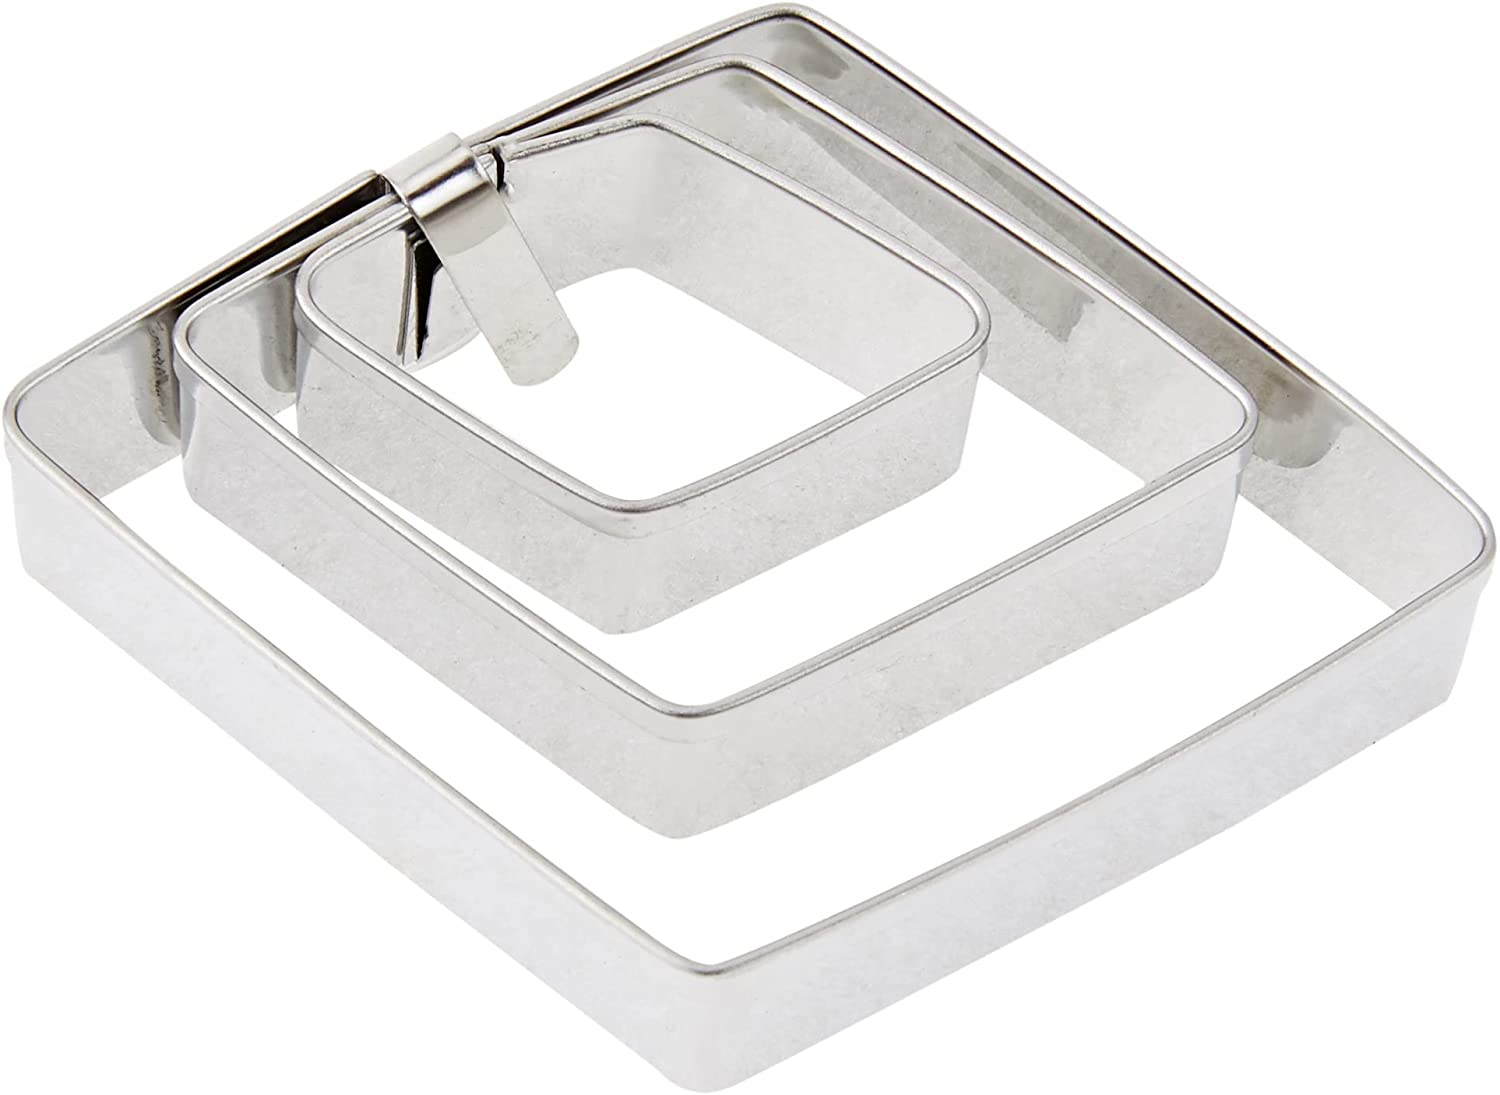 Staedter Terrace Rhombus Smooth Cookie Cutter, Set of 3